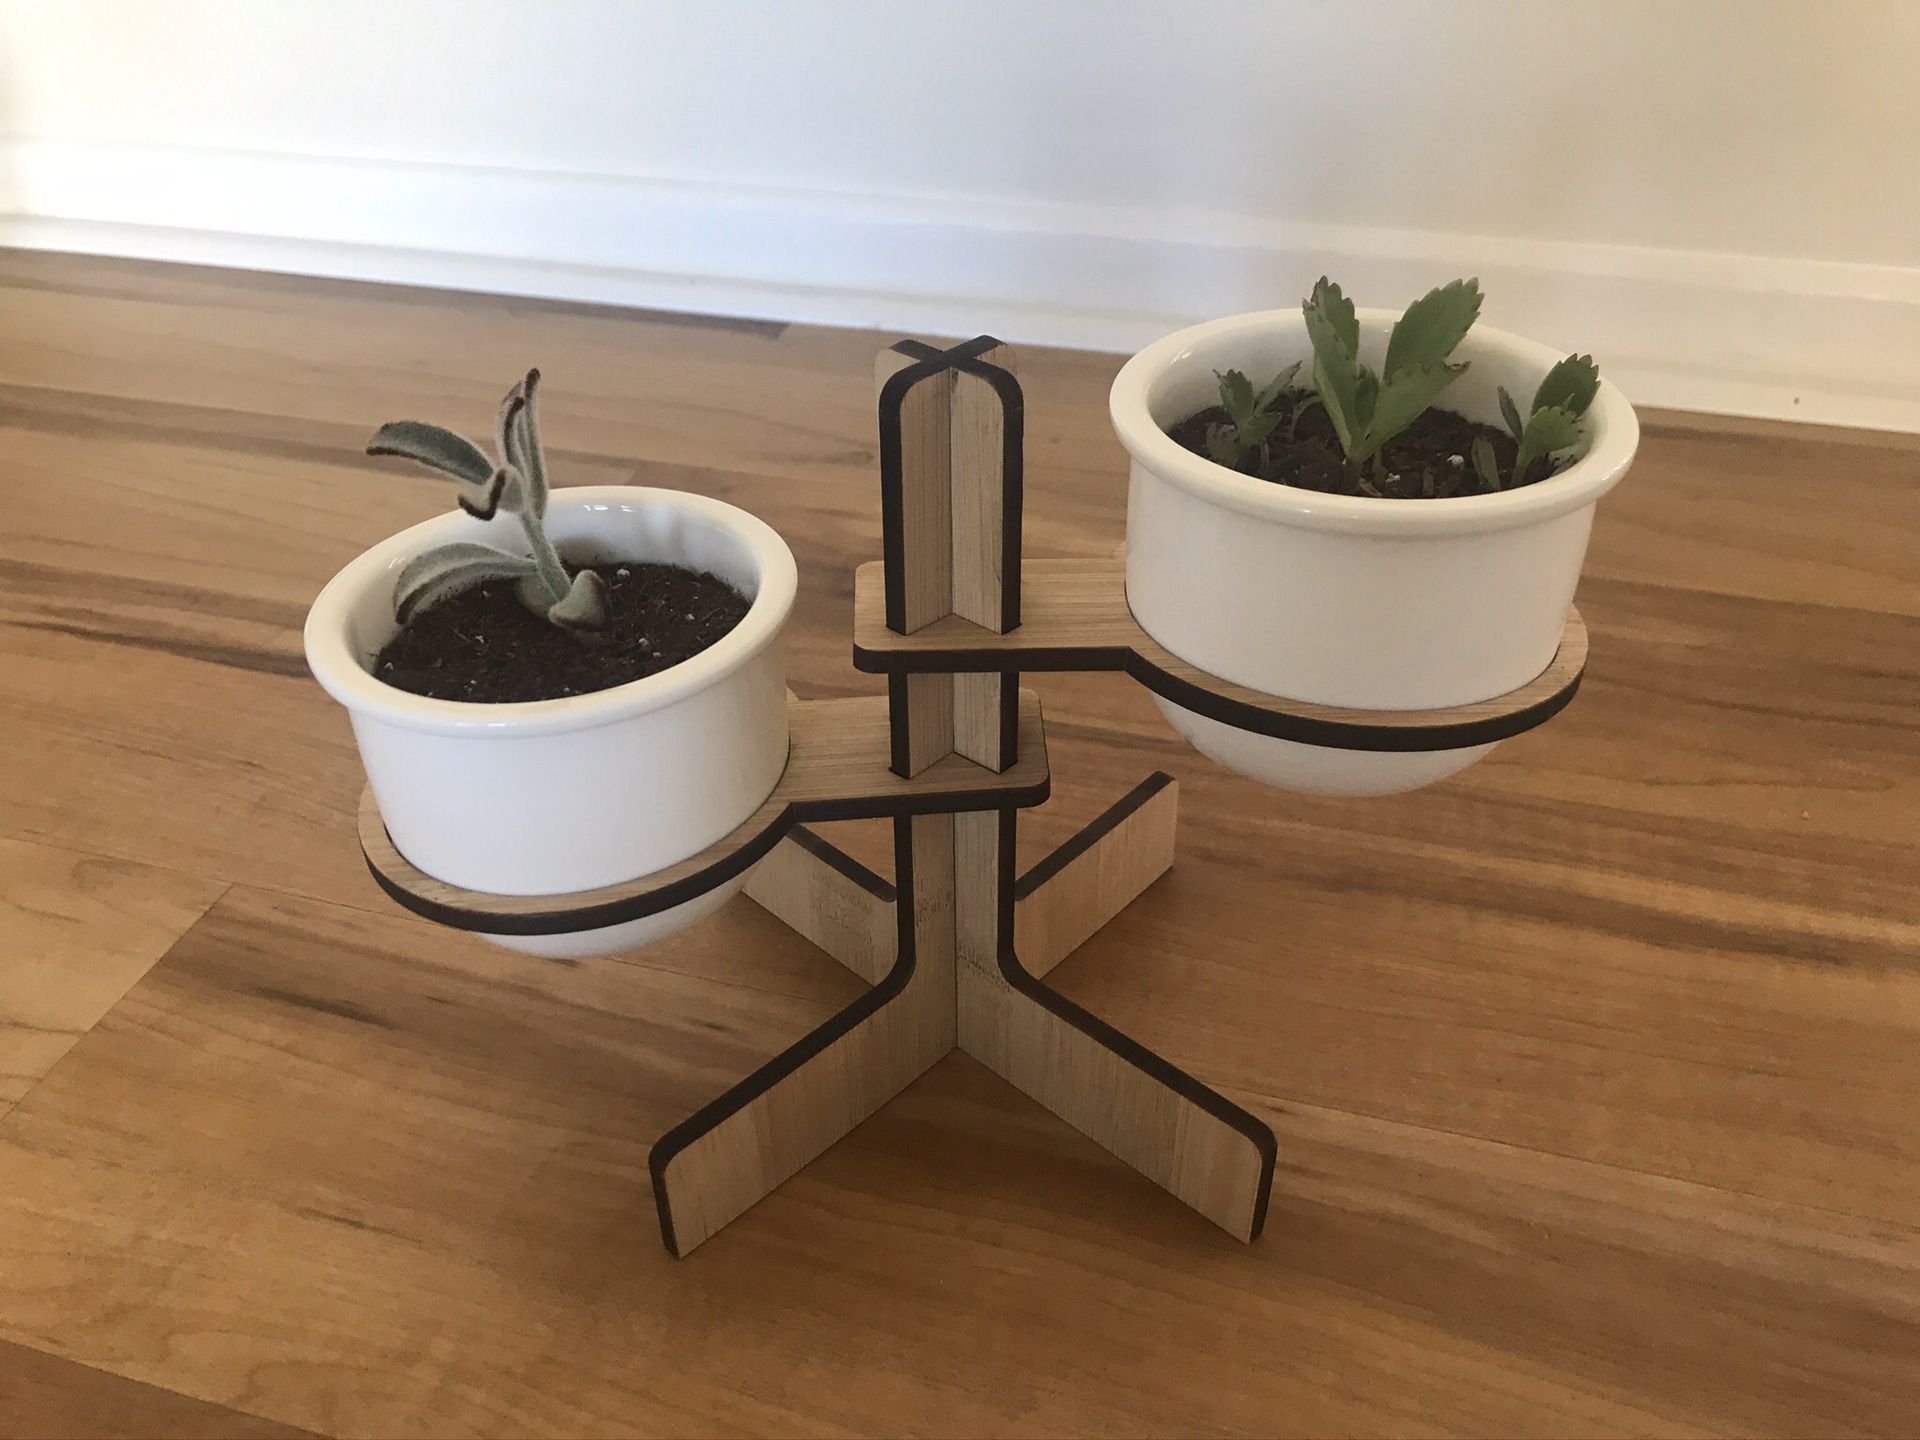 Succulent/plant bamboo stand